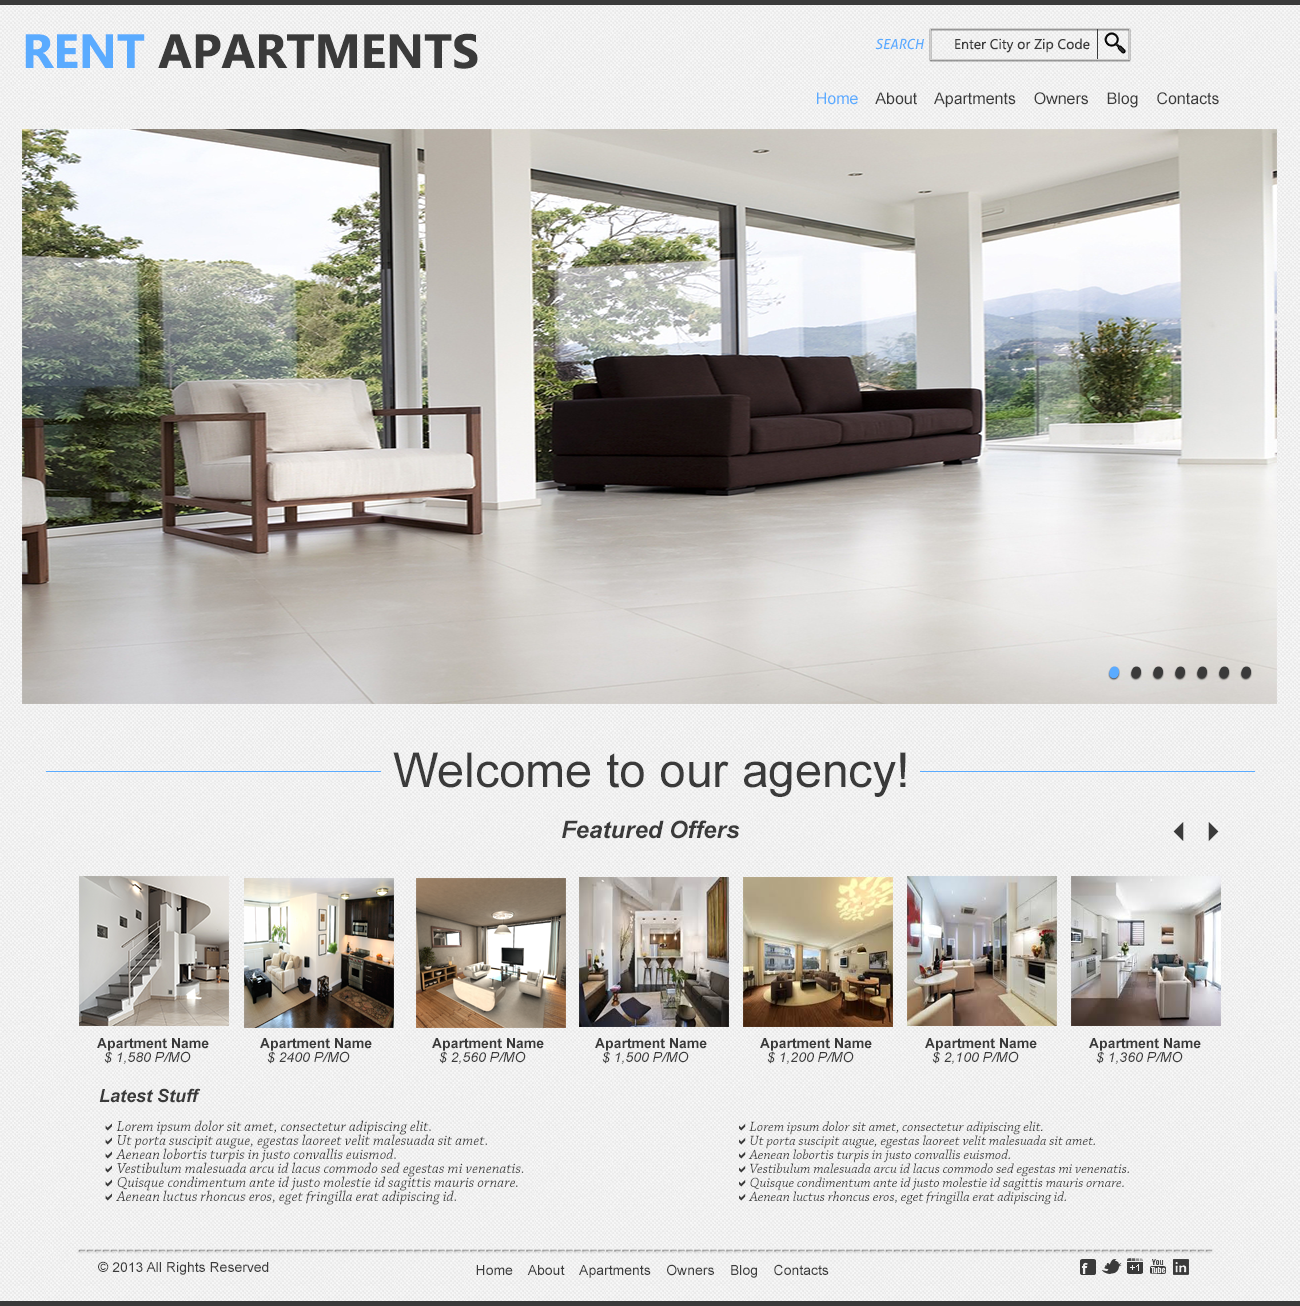 Rent Apartments - PSD Homepage Template by FasiullaKhan on DeviantArt Intended For Apartment Rental Flyer Template